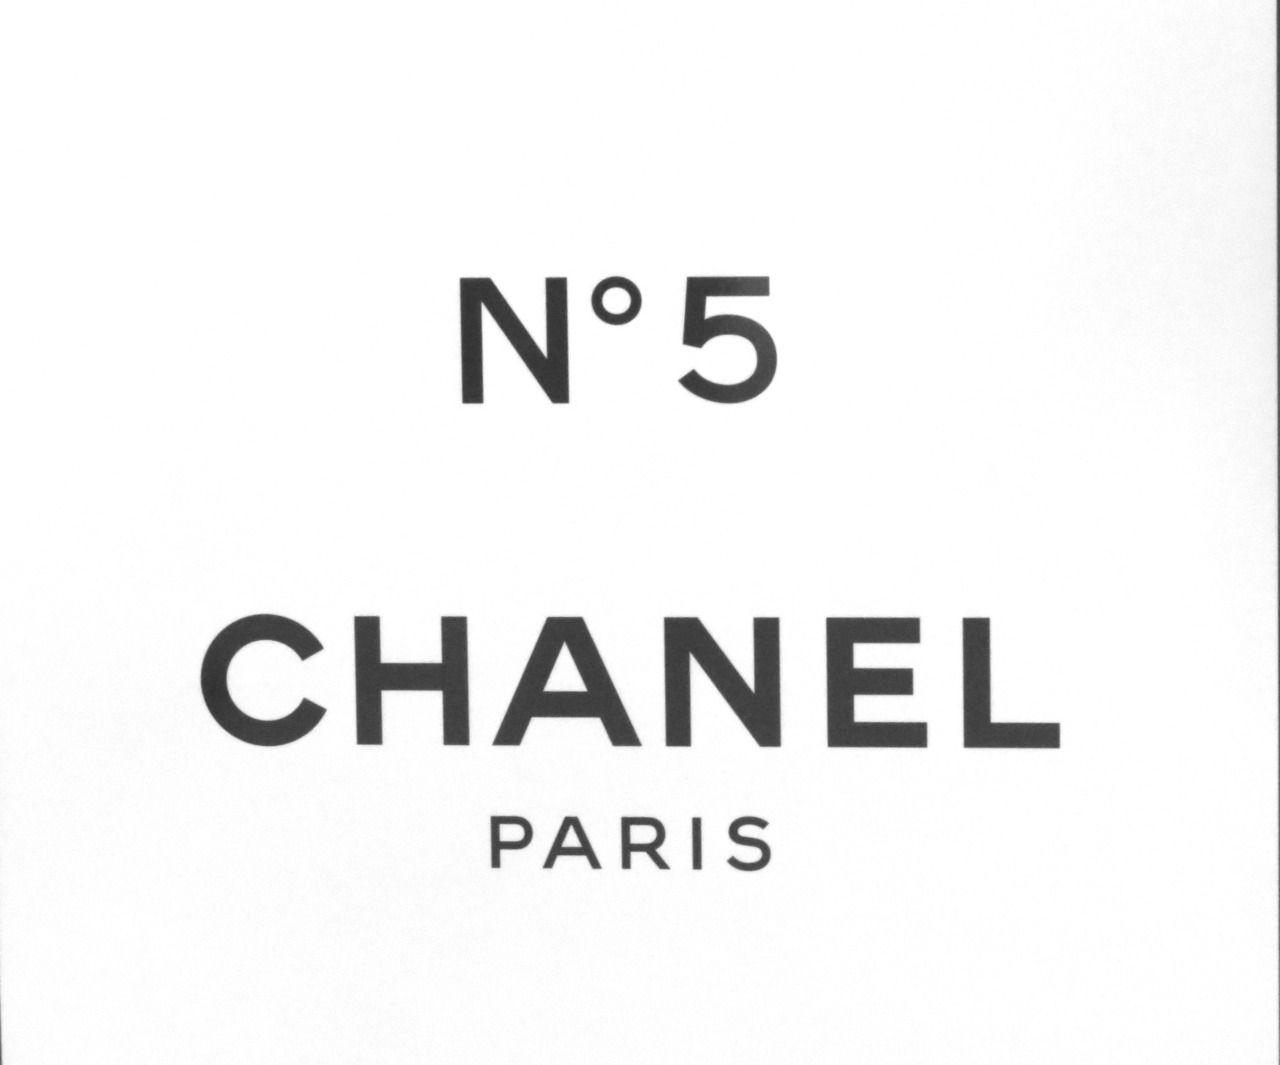 Chanel Paris Logo - 34 images about Chanel on We Heart It | See more about chanel ...